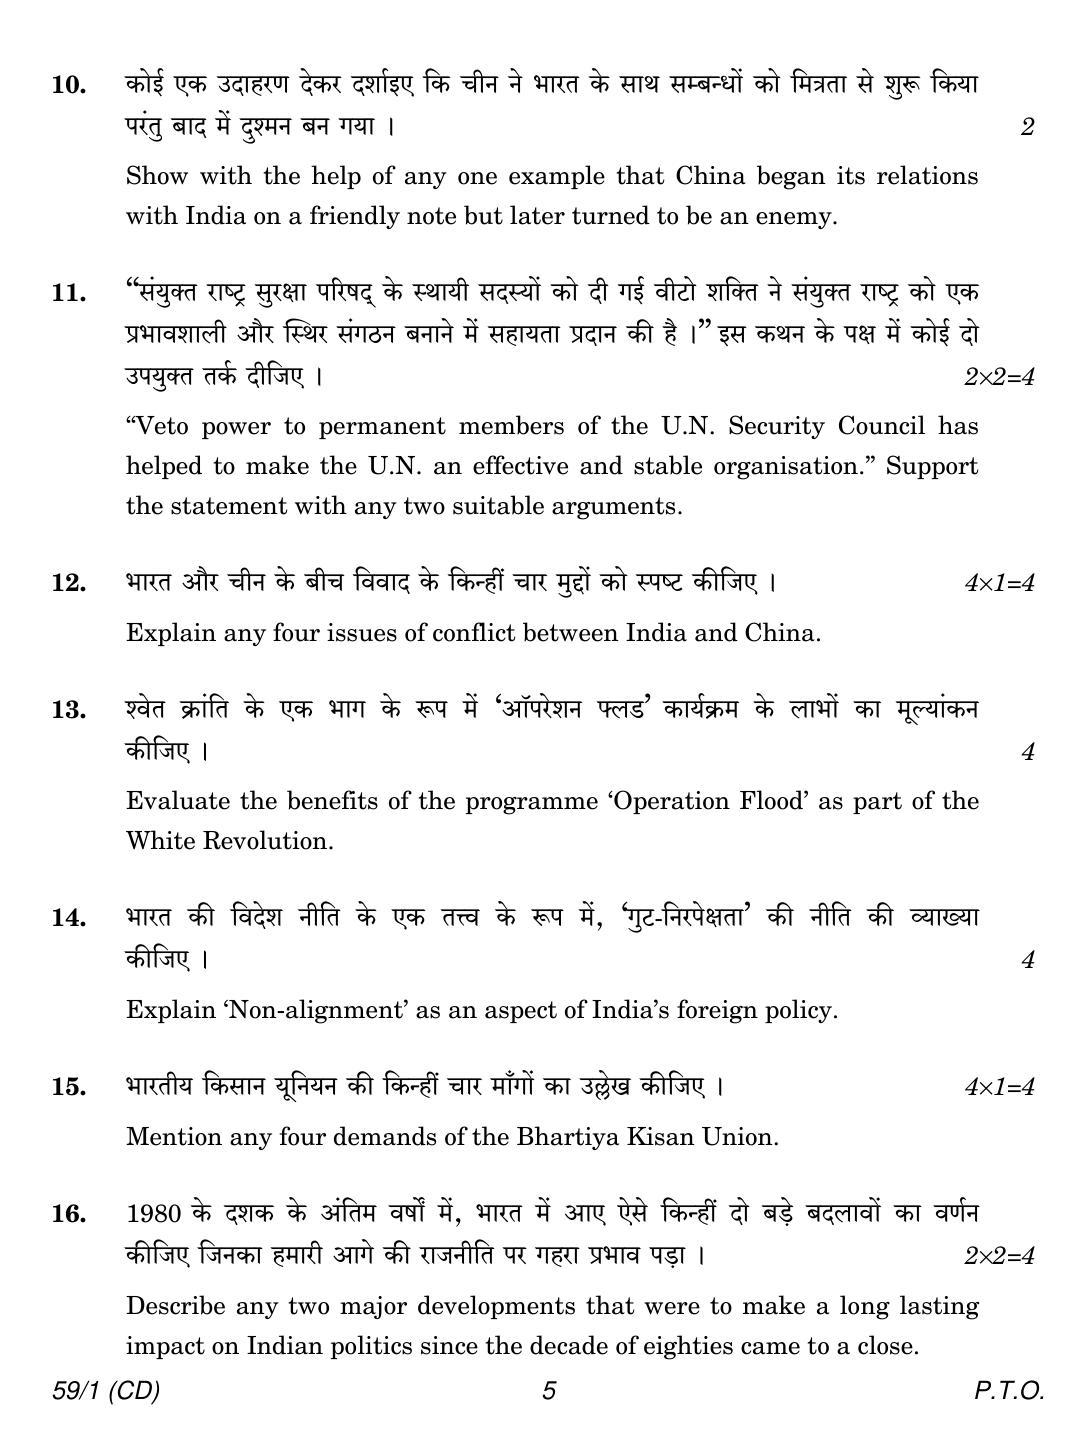 CBSE Class 12 59-1 POLITICAL SCIENCE CD 2018 Question Paper - Page 5